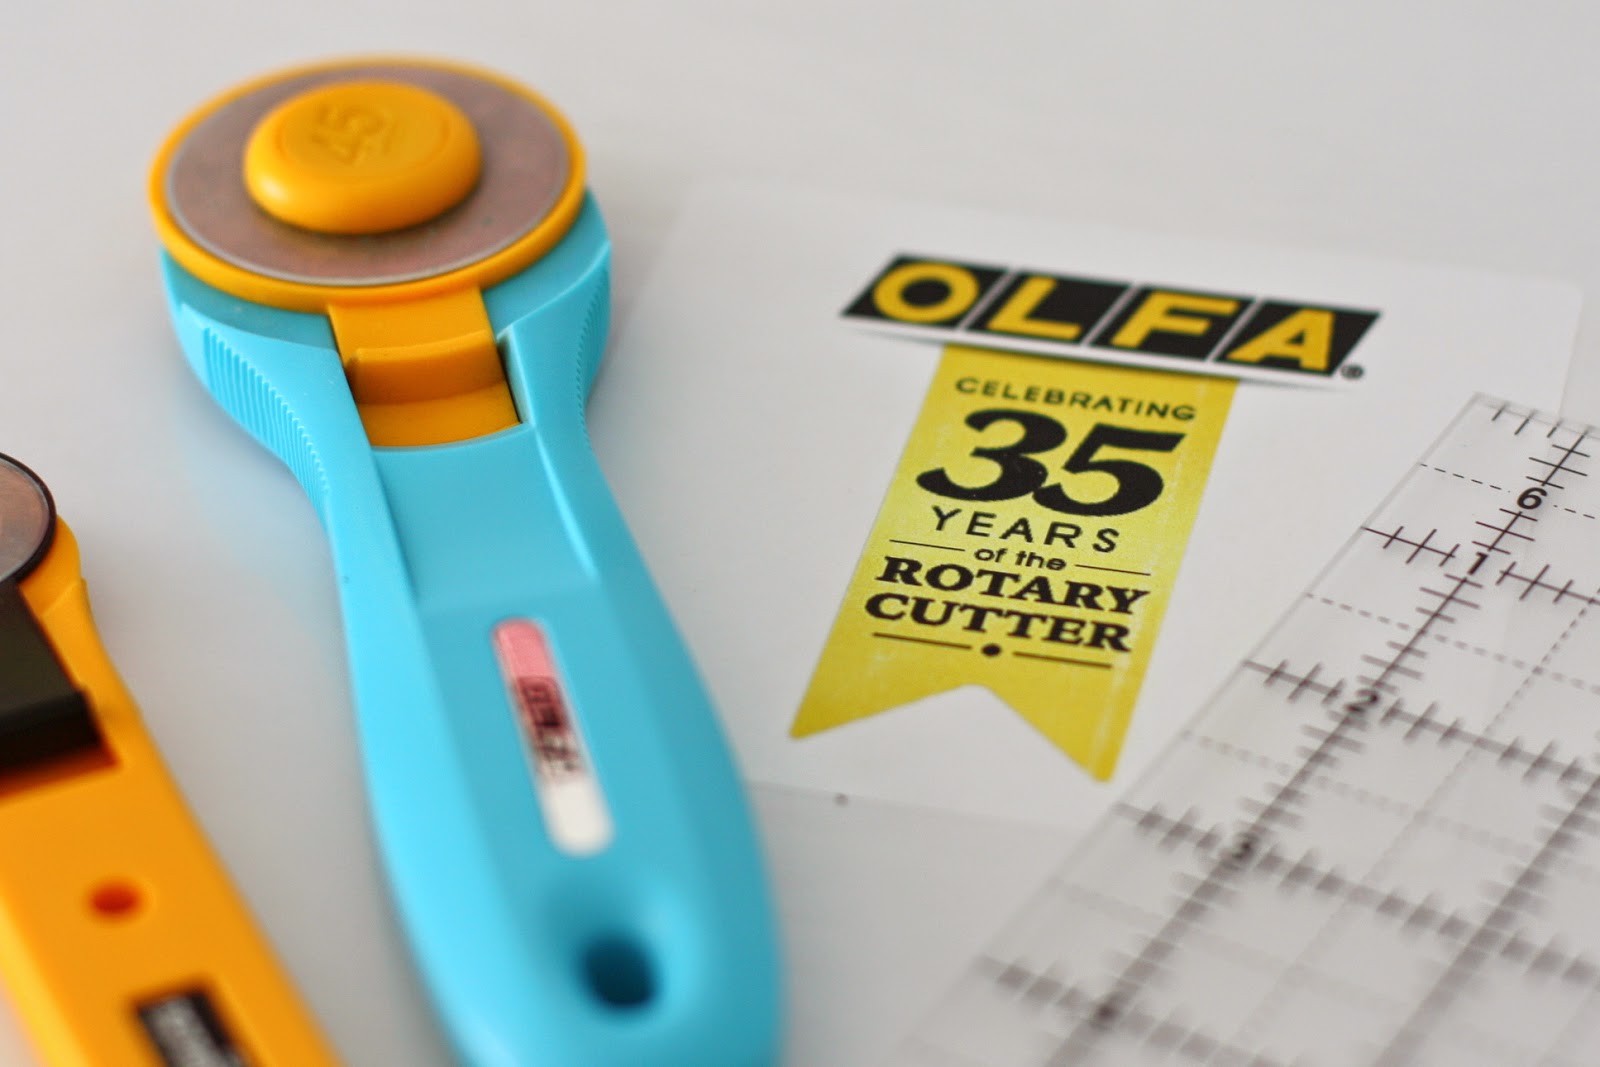 The invention of the rotary cutter changed quilting!